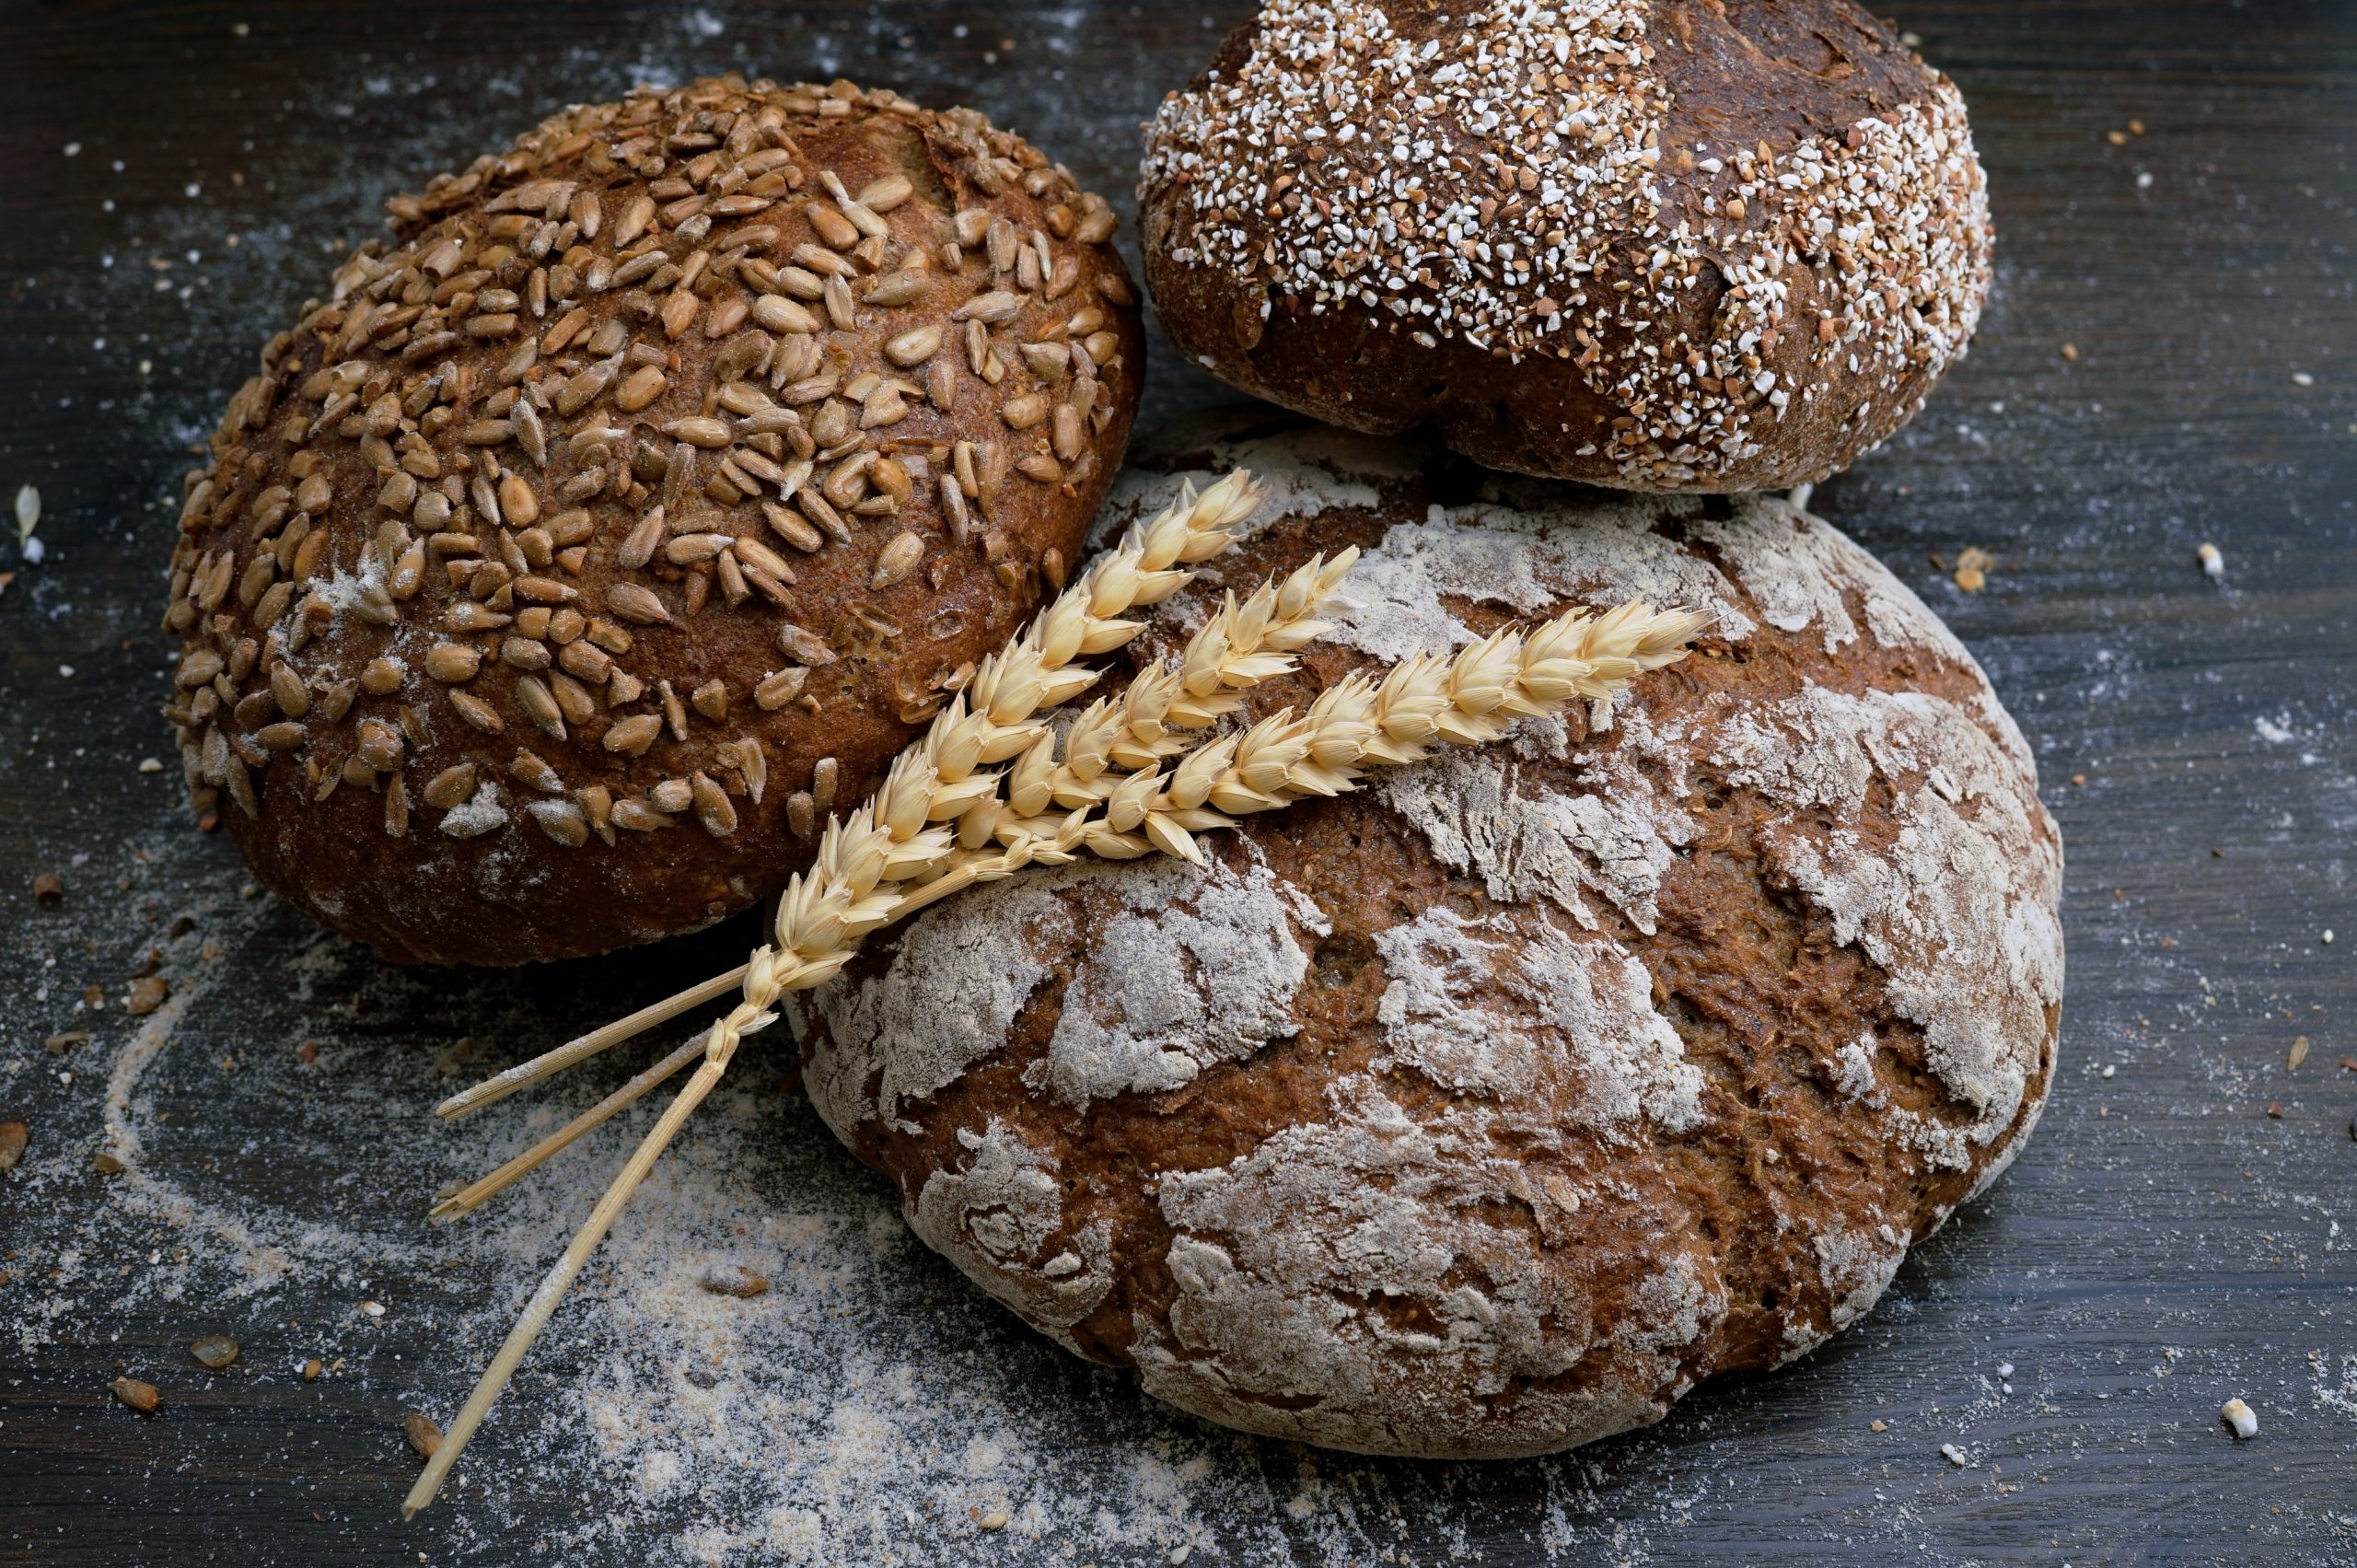 Gluten-free Diet and PCOS: Does It Work?